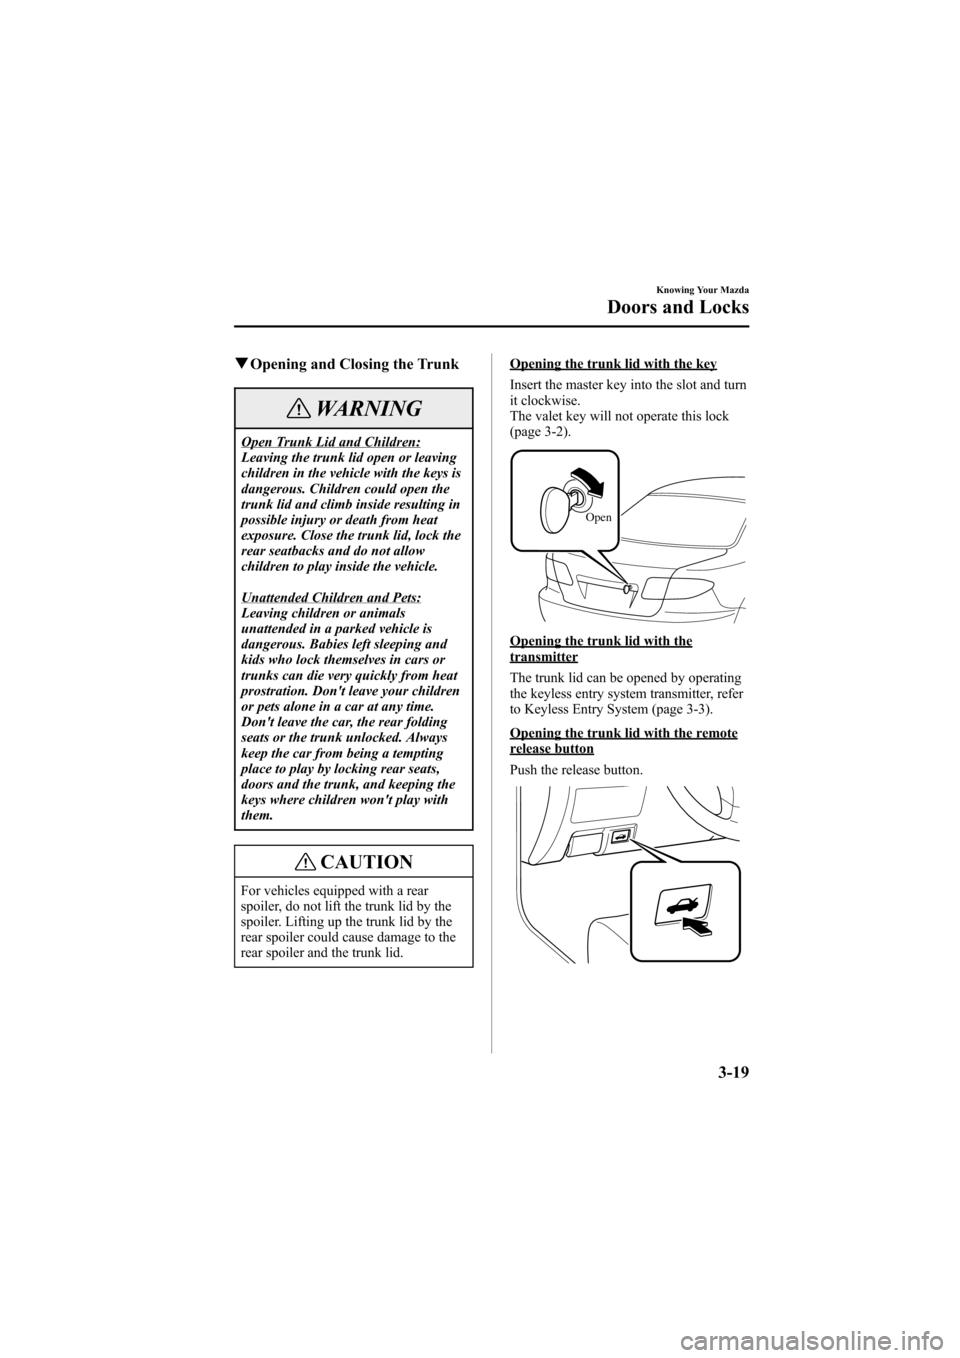 MAZDA MODEL 6 2005  Owners Manual (in English) Black plate (95,1)
qOpening and Closing the Trunk
WARNING
Open Trunk Lid and Children:
Leaving the trunk lid open or leaving
children in the vehicle with the keys is
dangerous. Children could open the